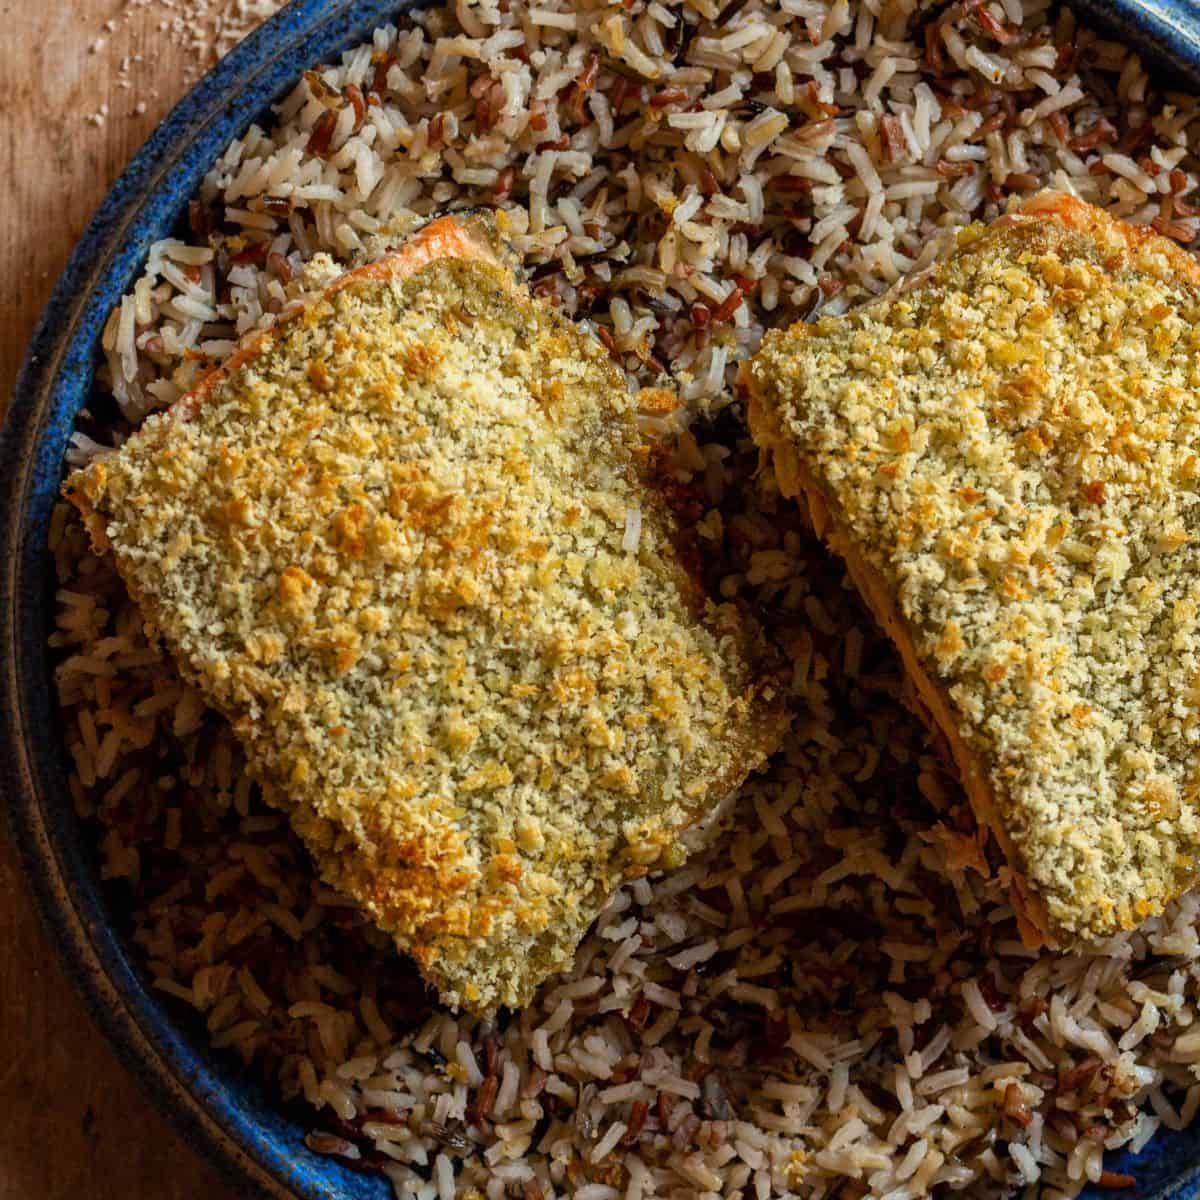 Pesto crusted salmon with panko bread crumbs, over a bed of rice.